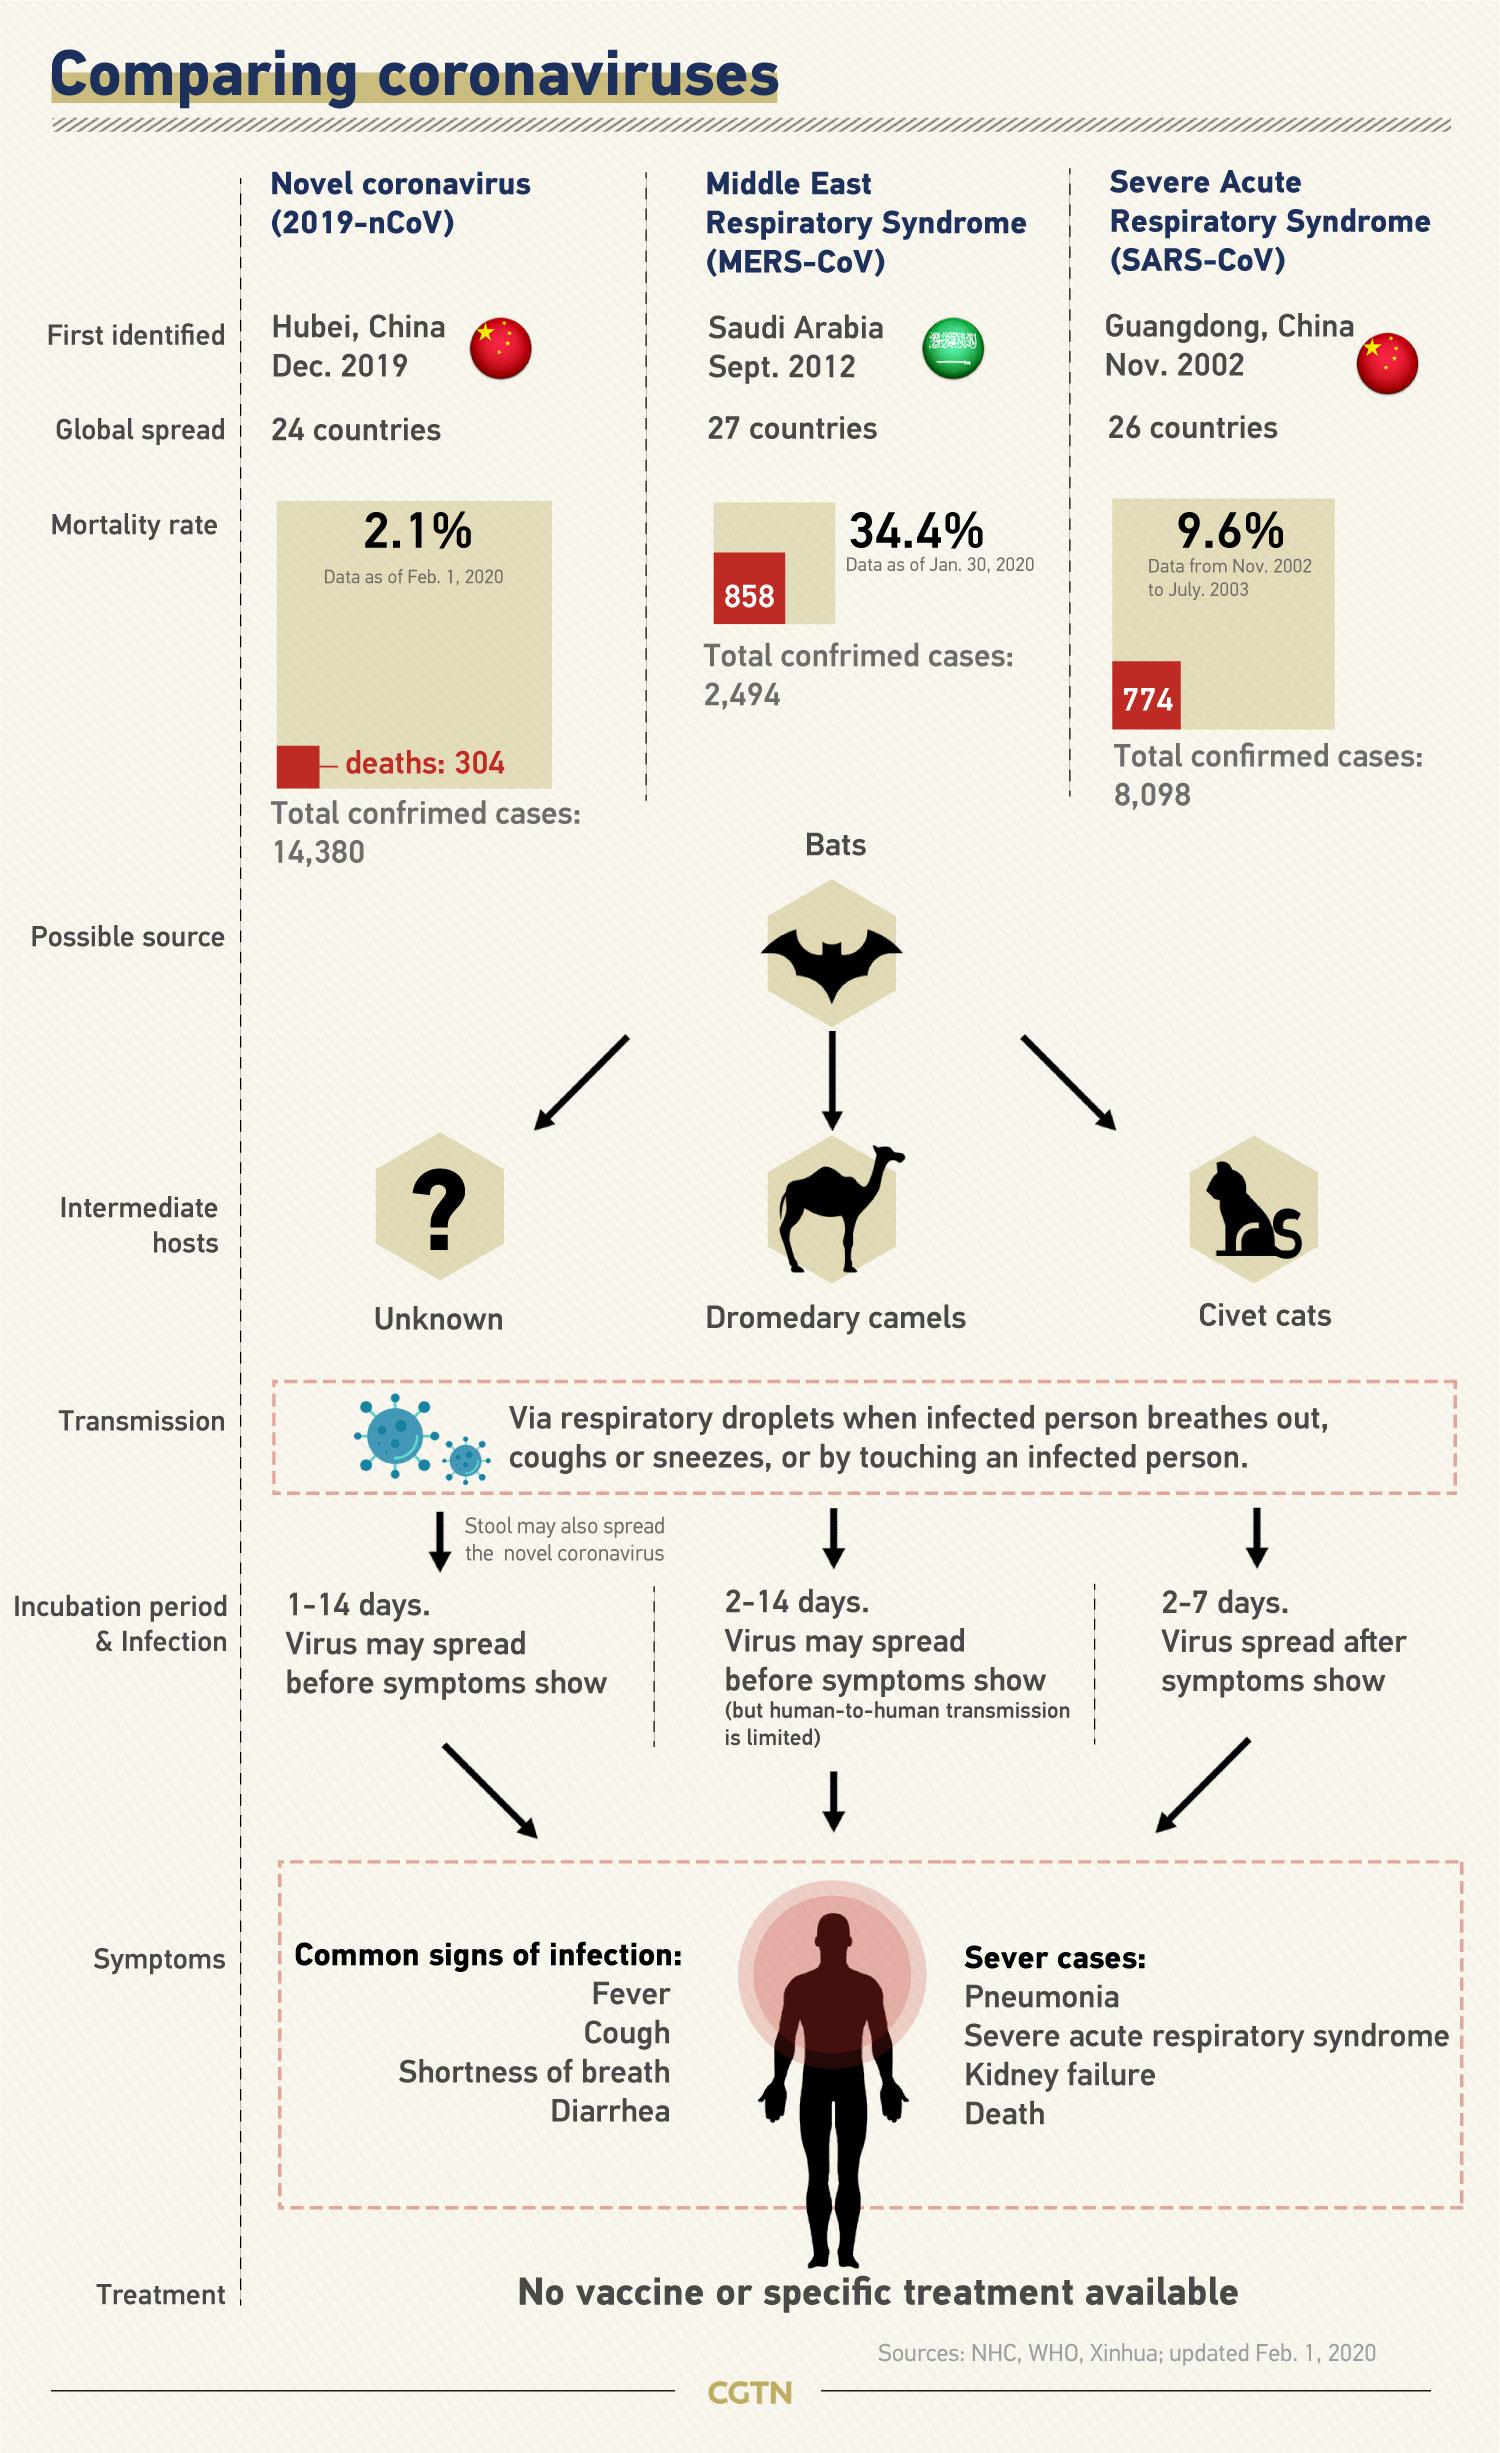 Graphics: All you need to know about the coronaviruses - CGTN1500 x 2453